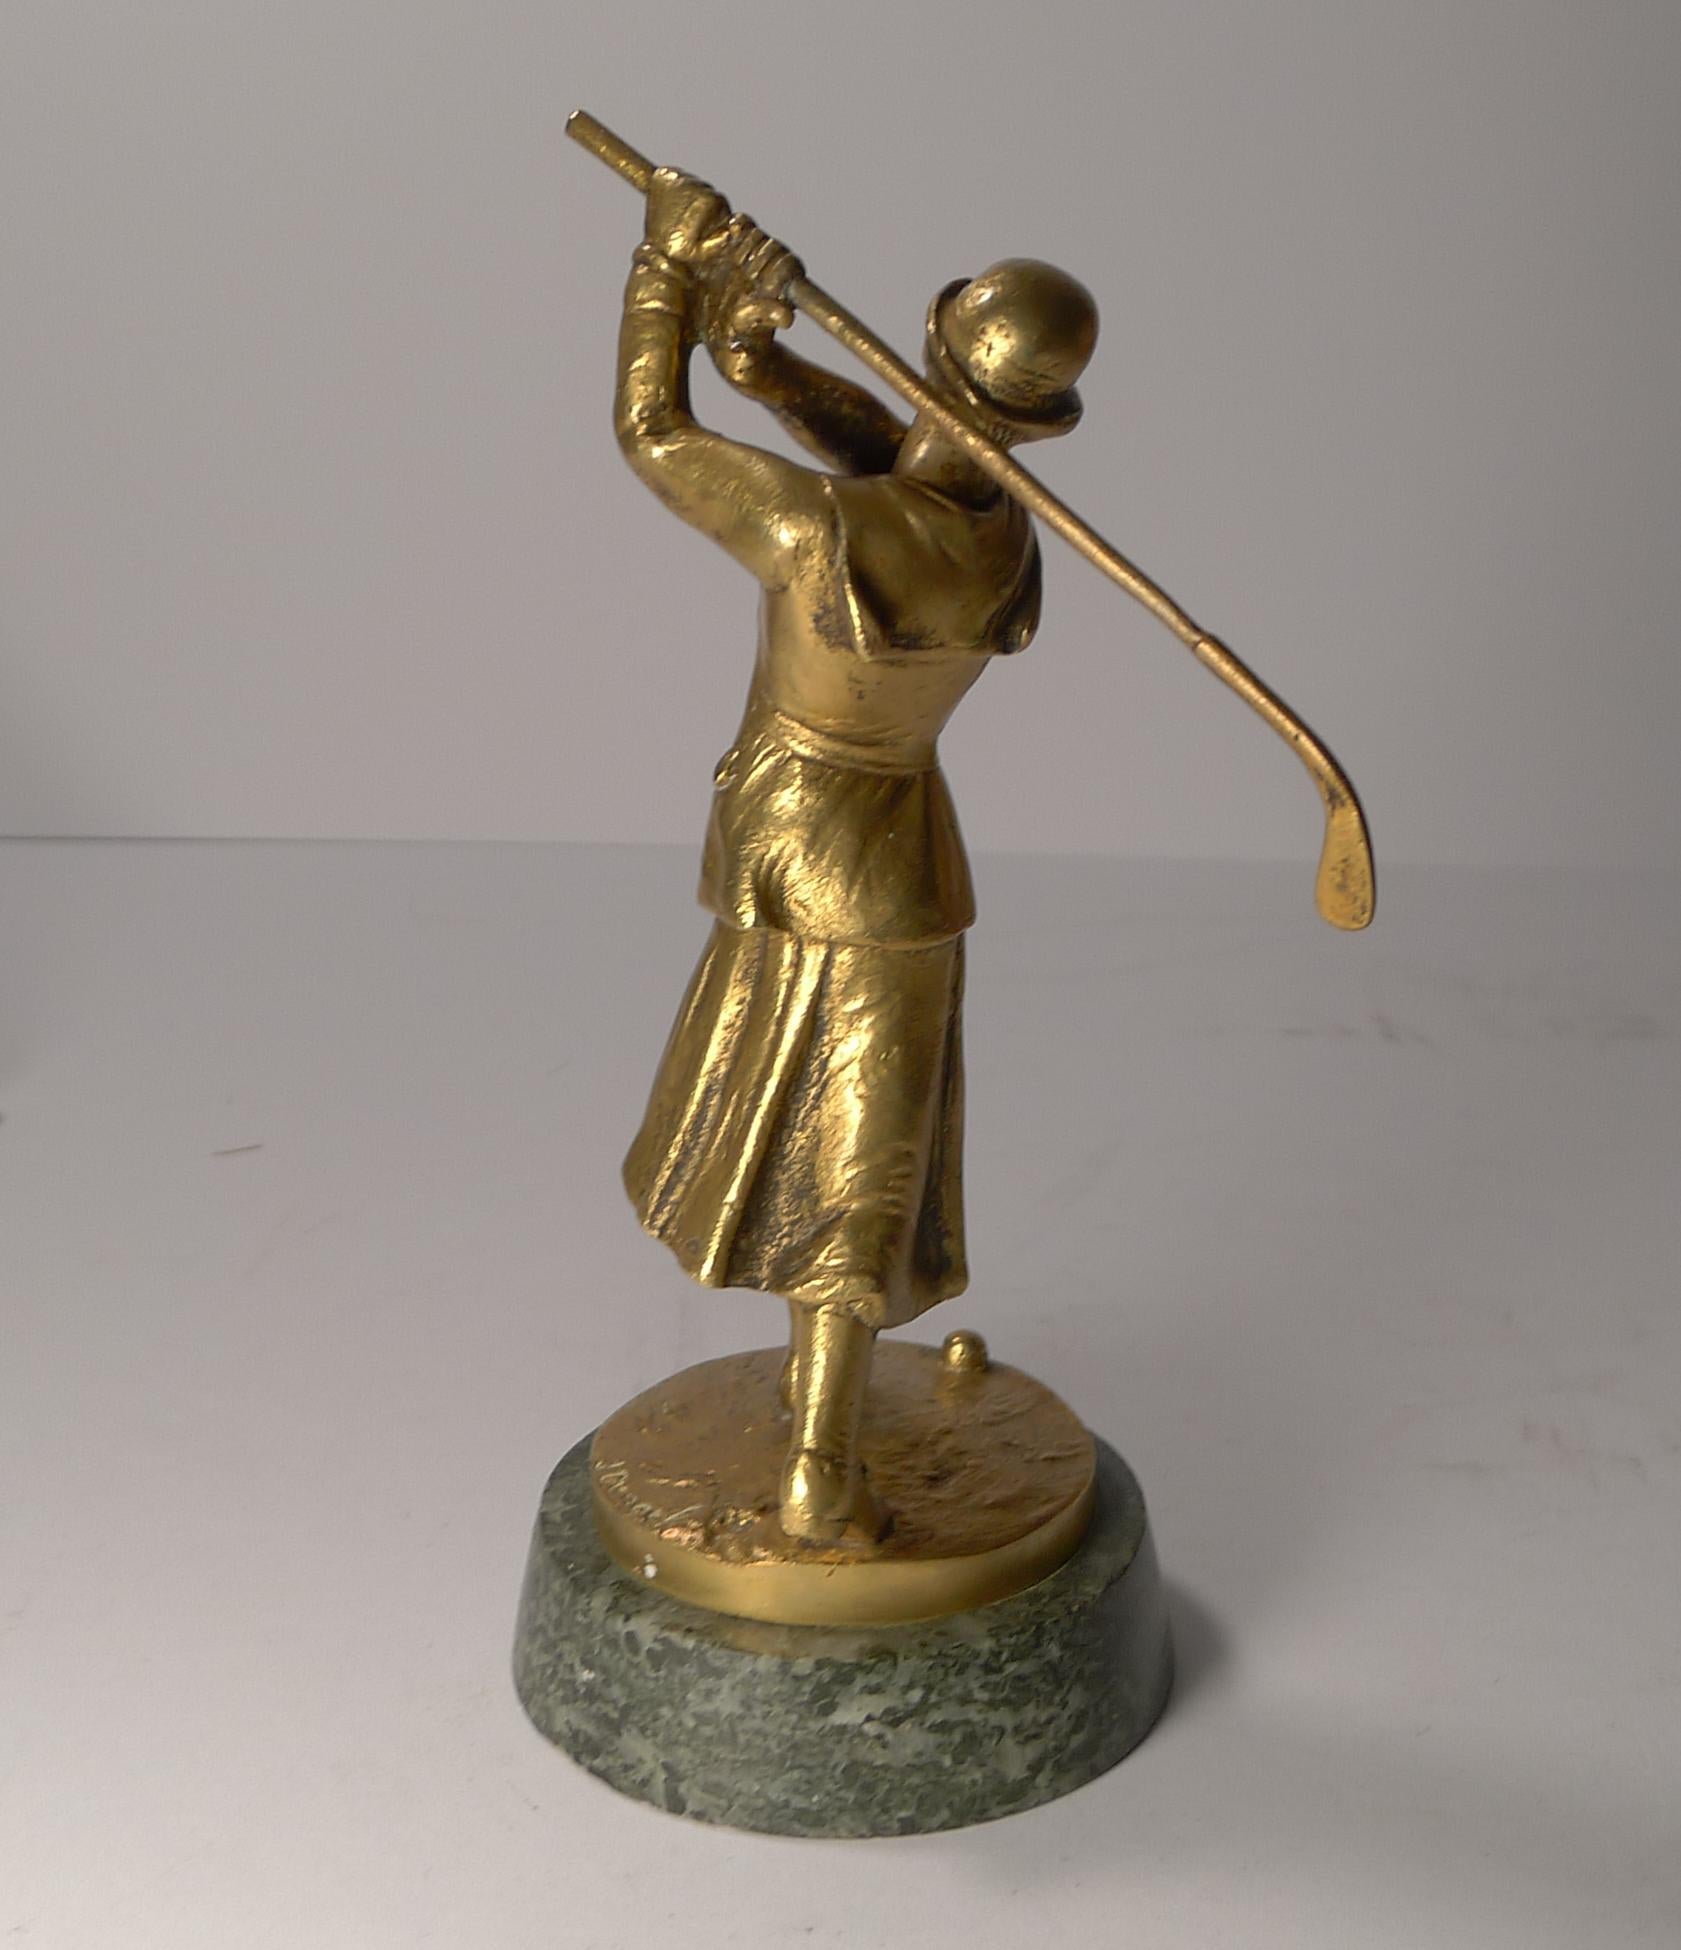 Art Deco Bronze Car Mascot in the from of a Lady Golfer, Jose Dunach For Sale 3